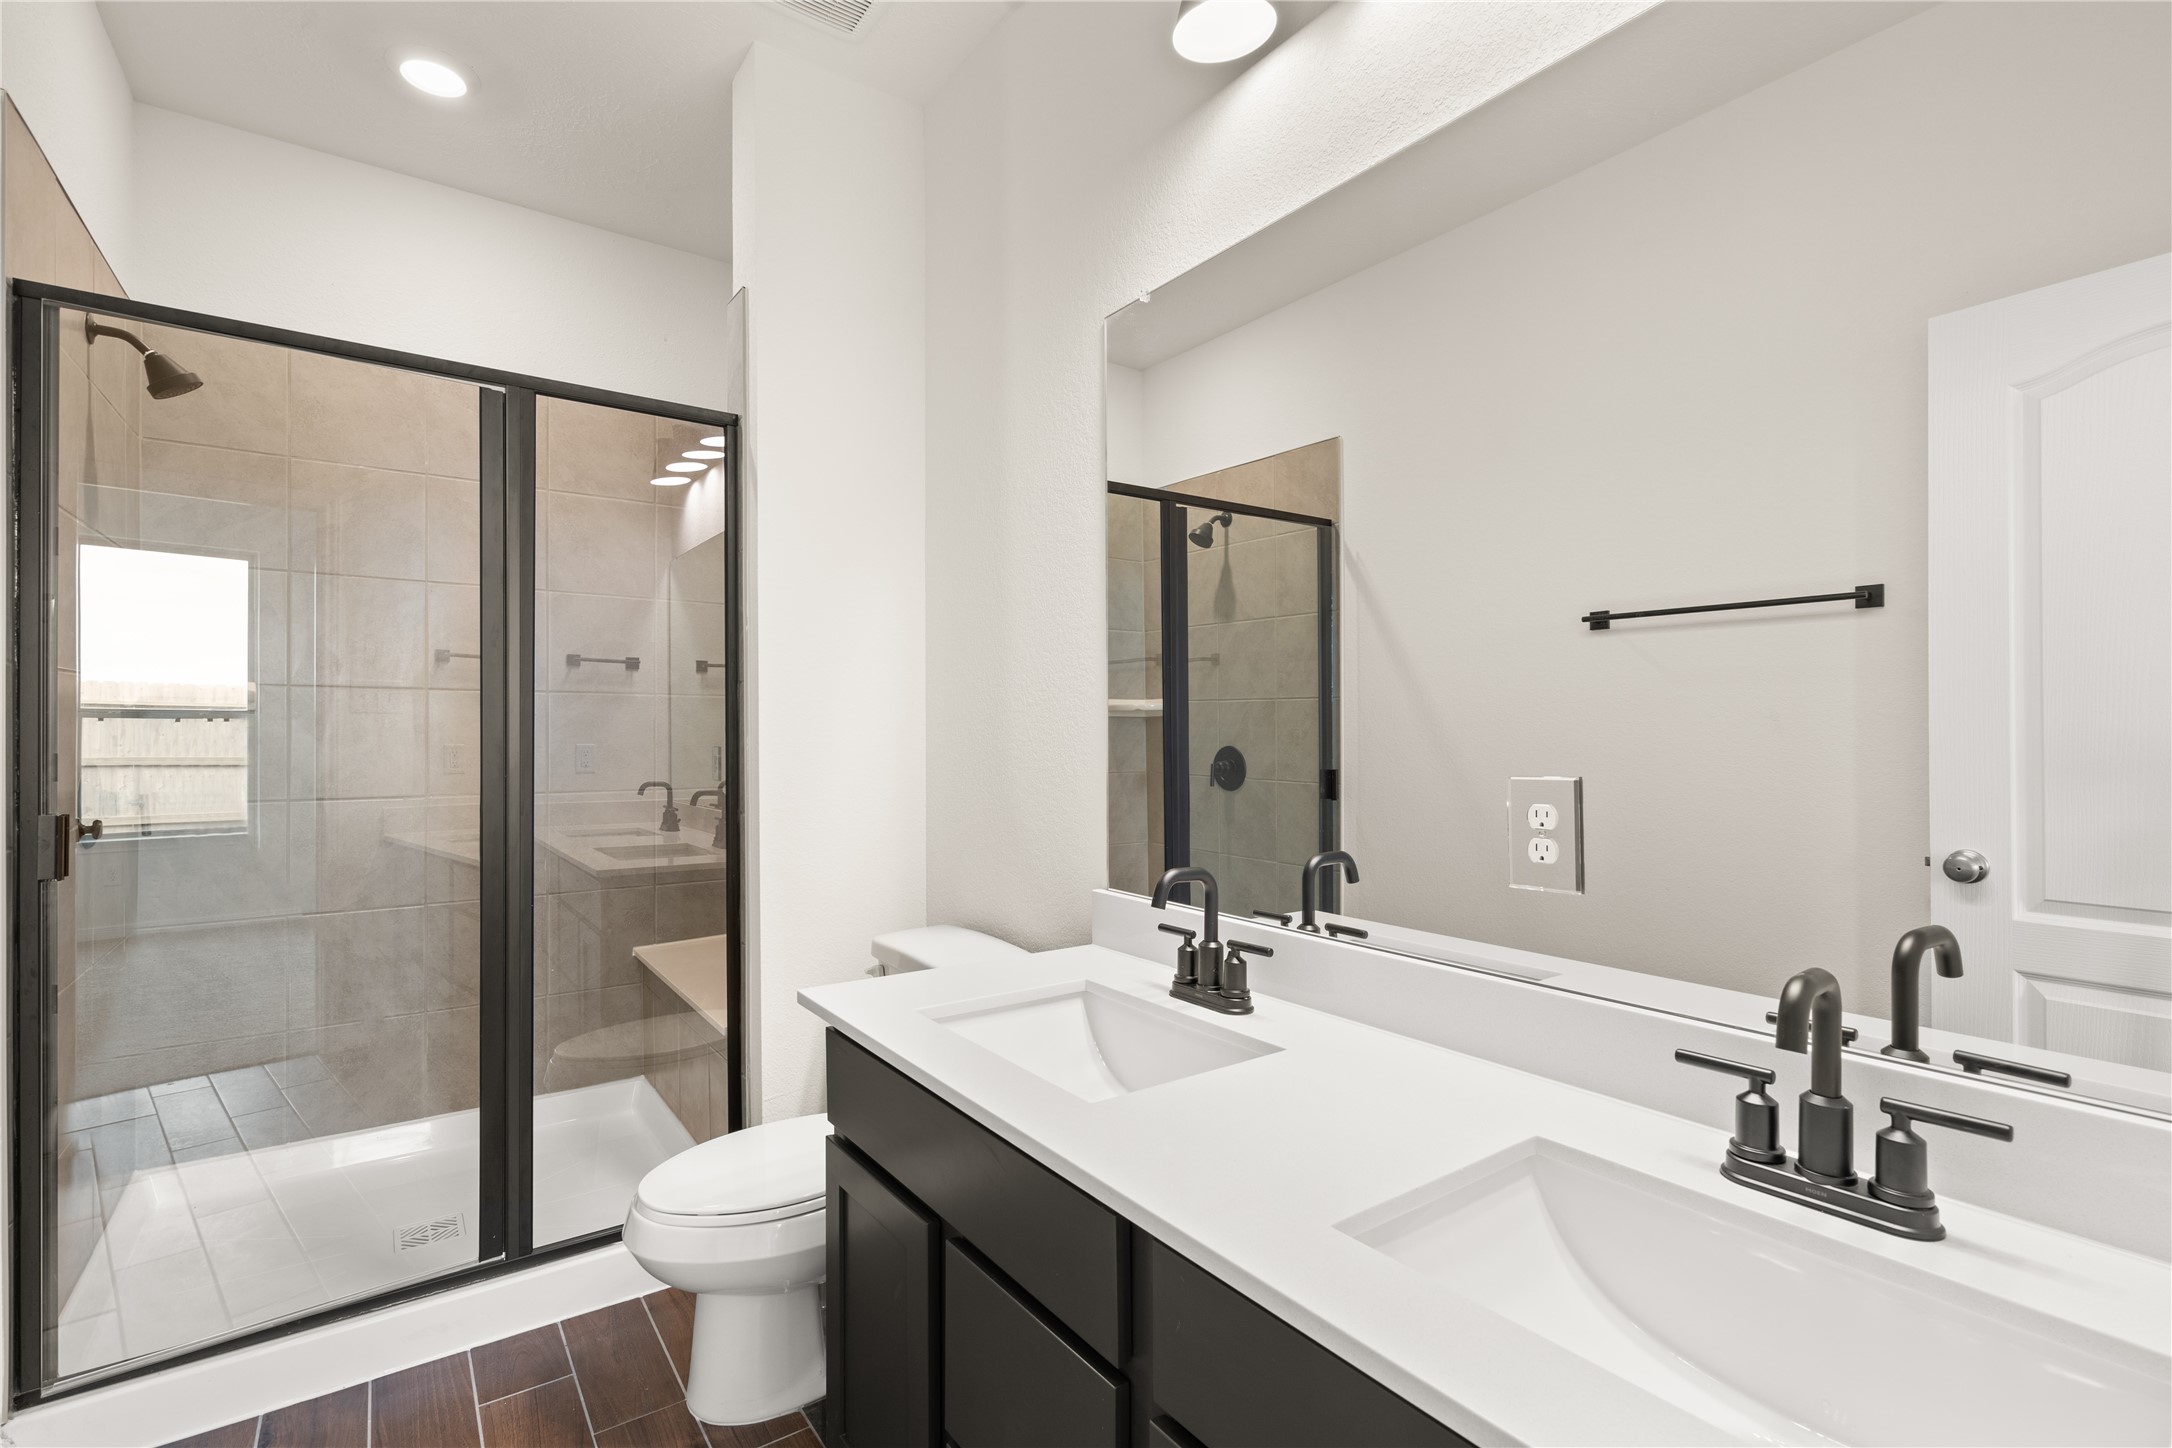 This primary bathroom is definitely move-in ready! Featuring a dark framed walk-in shower with tile surround, dark stained cabinets with light countertops, spacious walk-in closet with shelving, high ceilings, custom paint, sleek and dark modern finishes.
